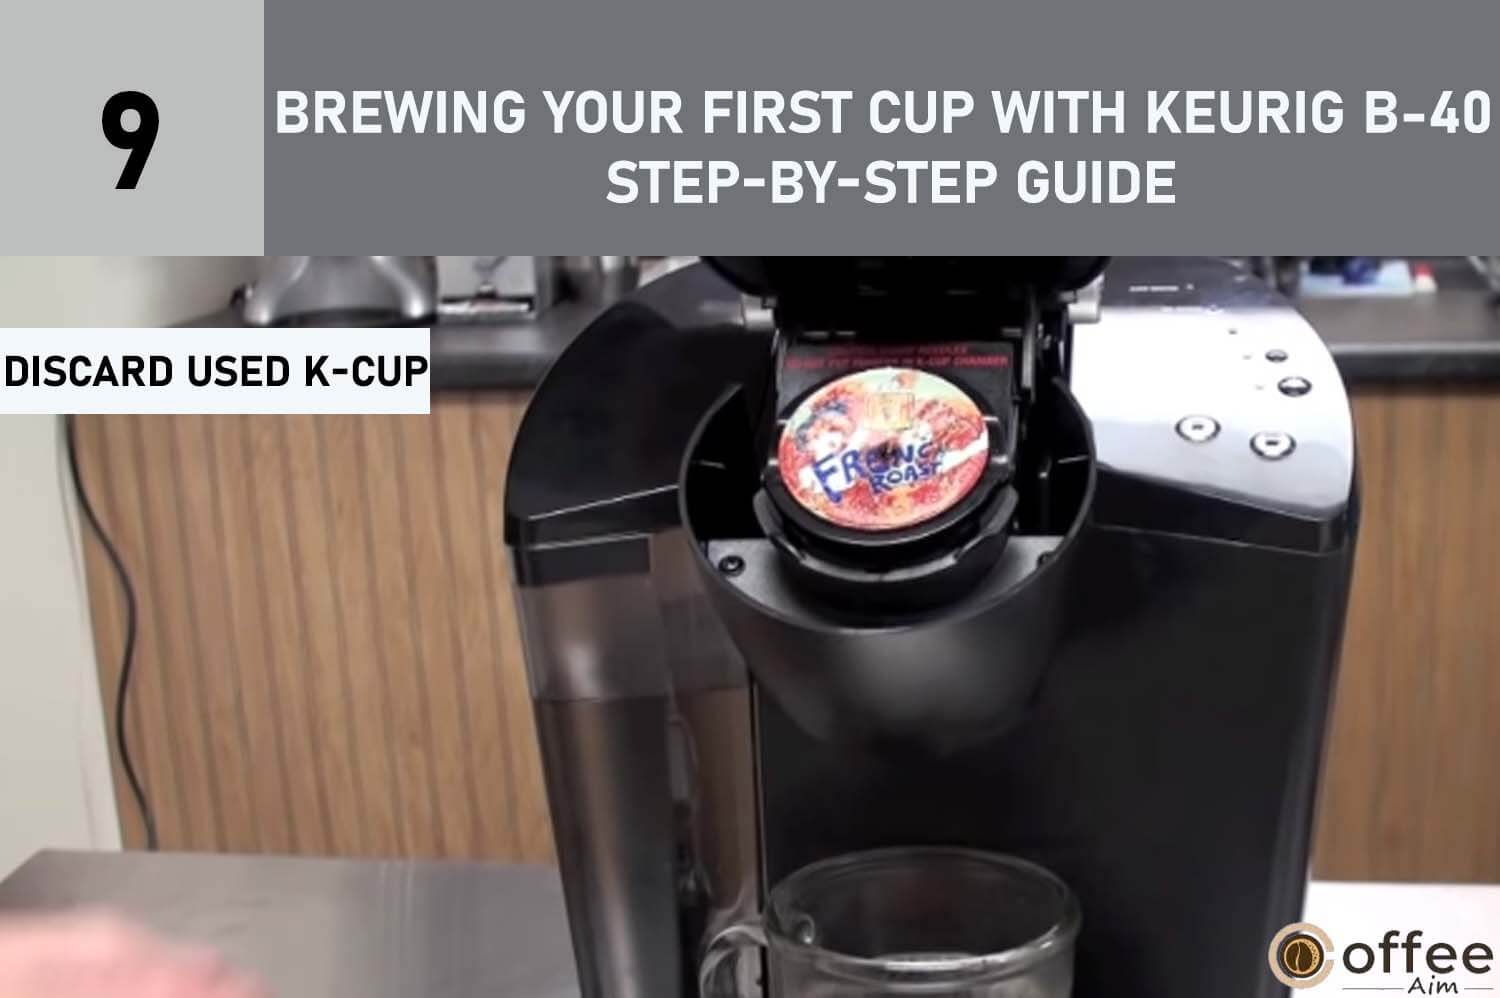 The accompanying image illustrates the process of "Discard Used K-Cup" within the context of the comprehensive guide titled "Brewing Your First Cup with Keurig B-40 - Step-by-Step Guide," which is part of the article "How to Use Keurig B-40."